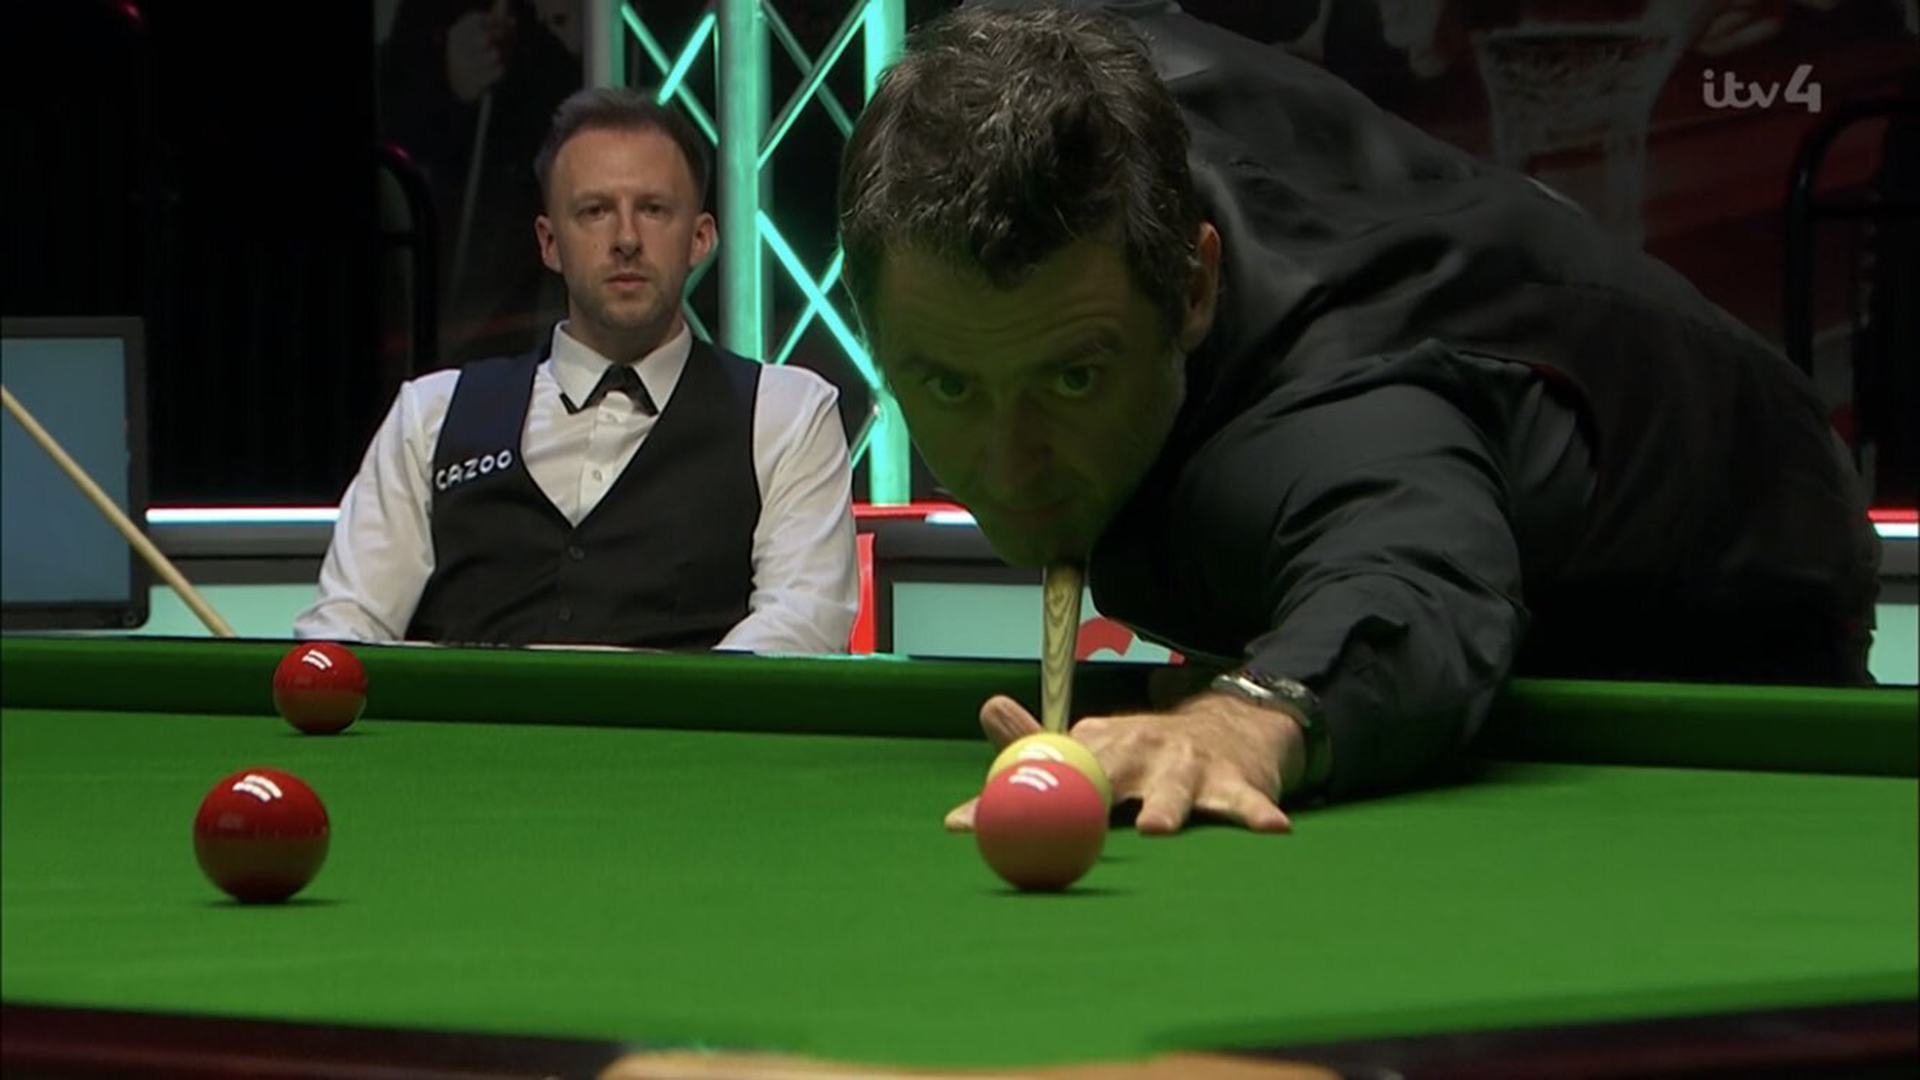 Snooker results: Ronnie O'Sullivan beats Judd Trump 6-3 at the Players  Championship